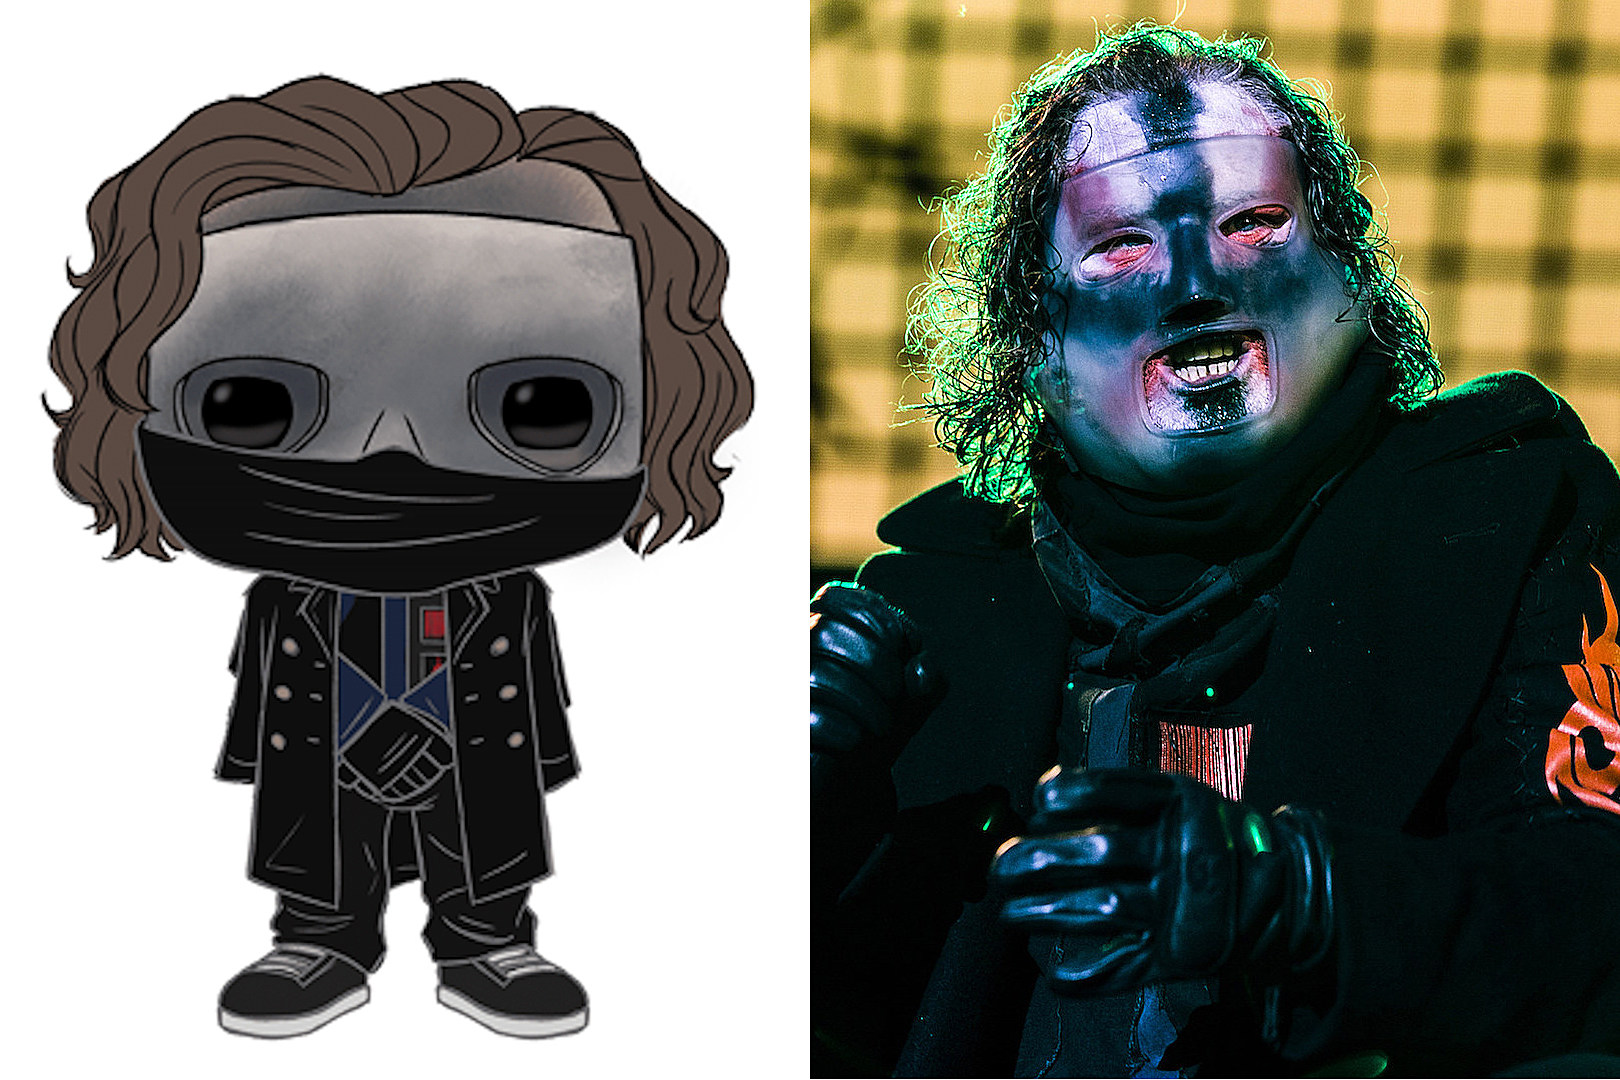 Three Funko Figures in 2021 + Maybe a New Album